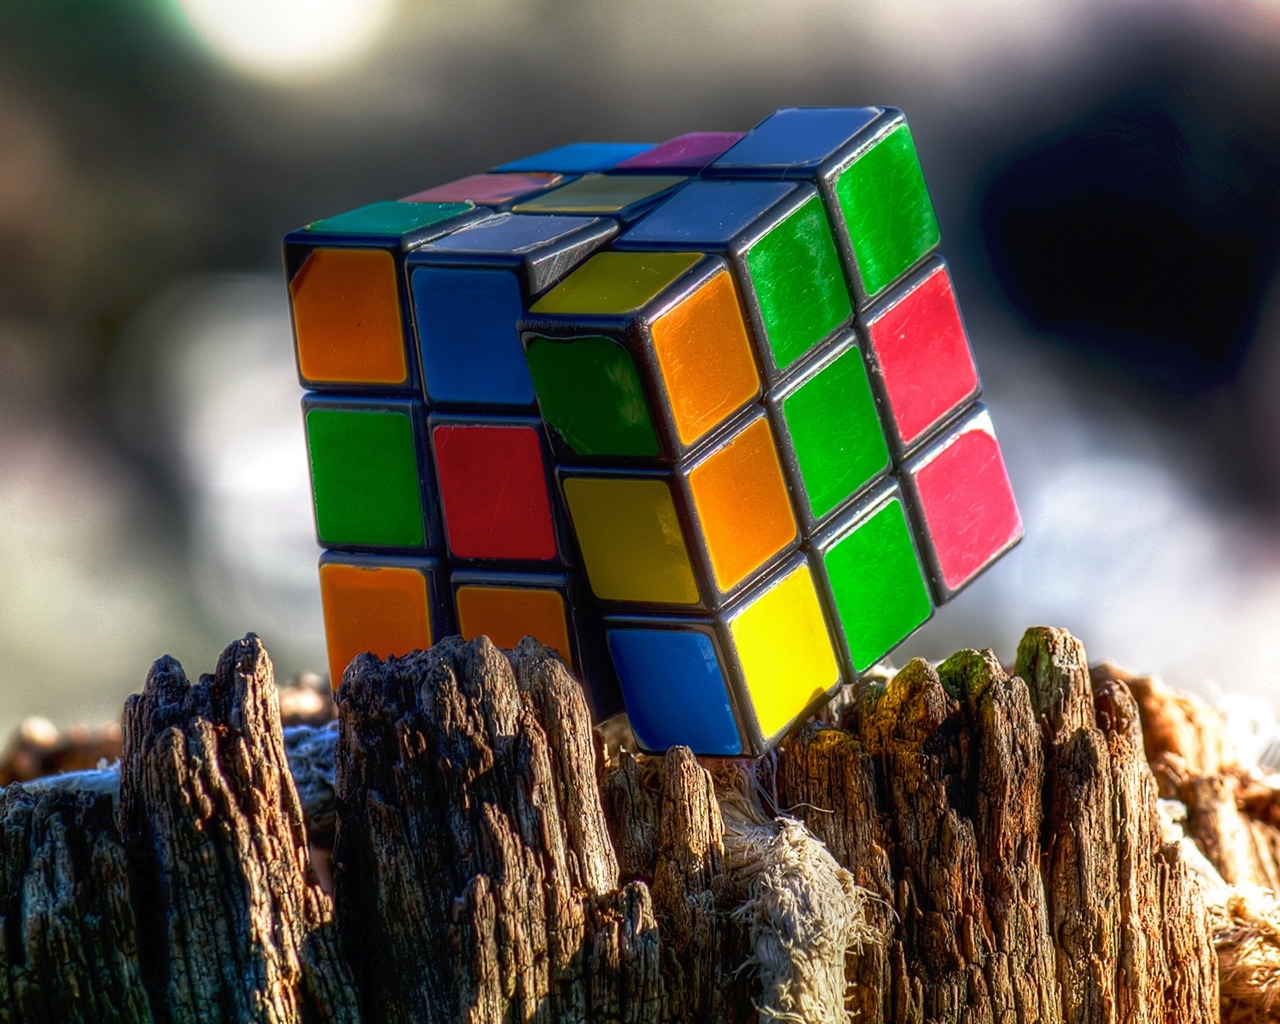 Rubiks Cube for 1280 x 1024 resolution